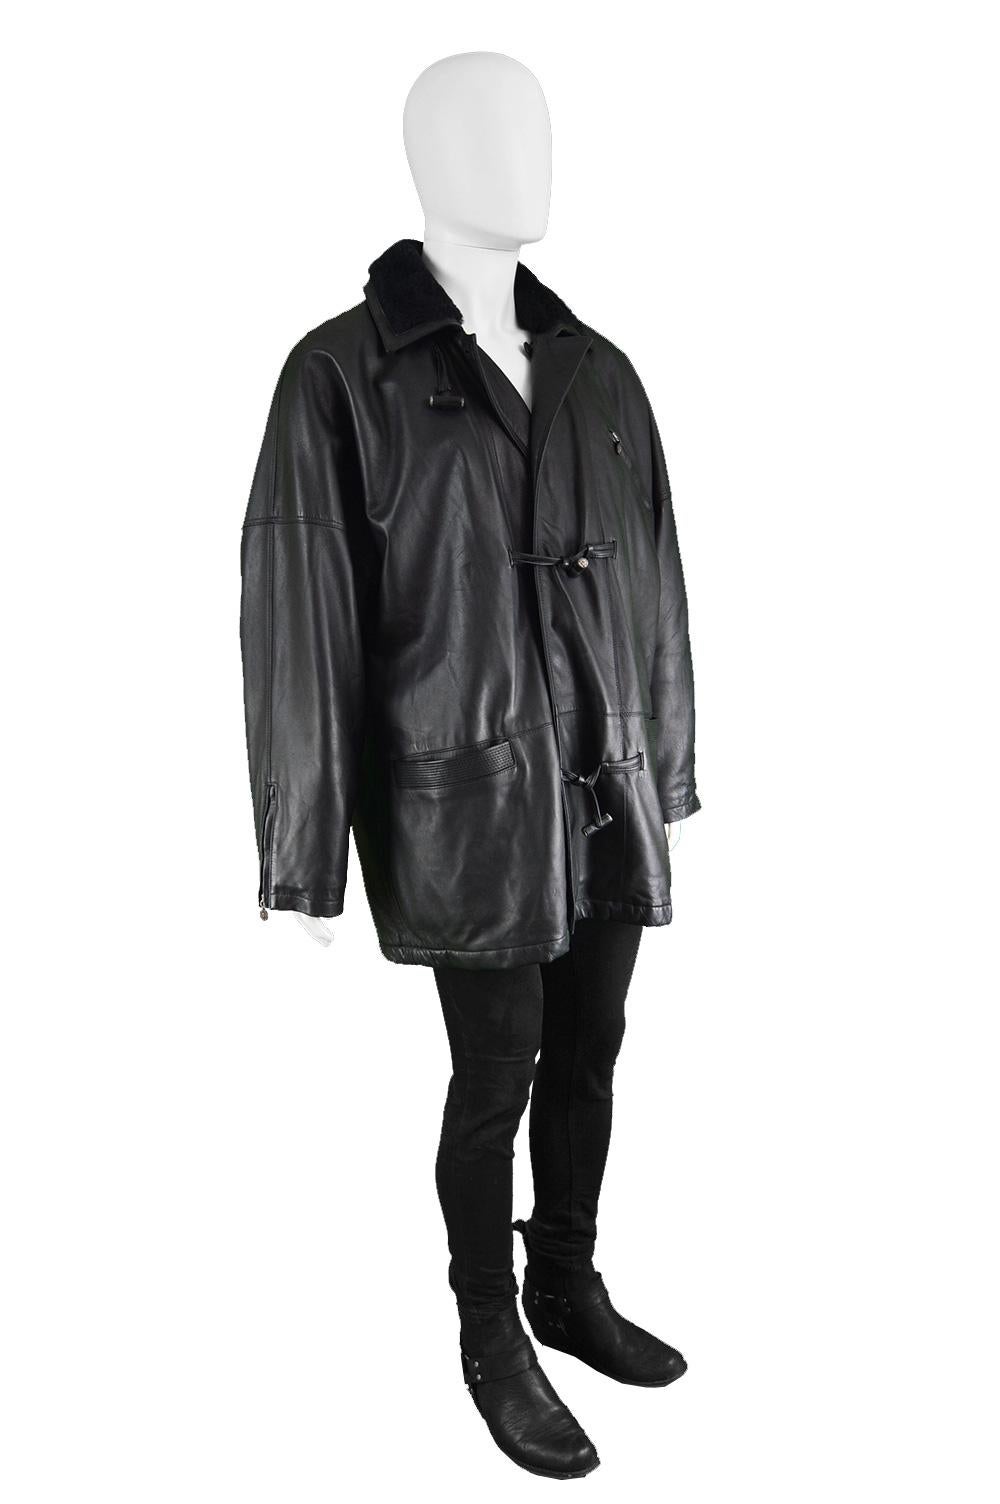 Gianni Versace Istante Men's Leather & Shearling Zeus Head Duffel Coat, 1990s In Excellent Condition For Sale In Doncaster, South Yorkshire